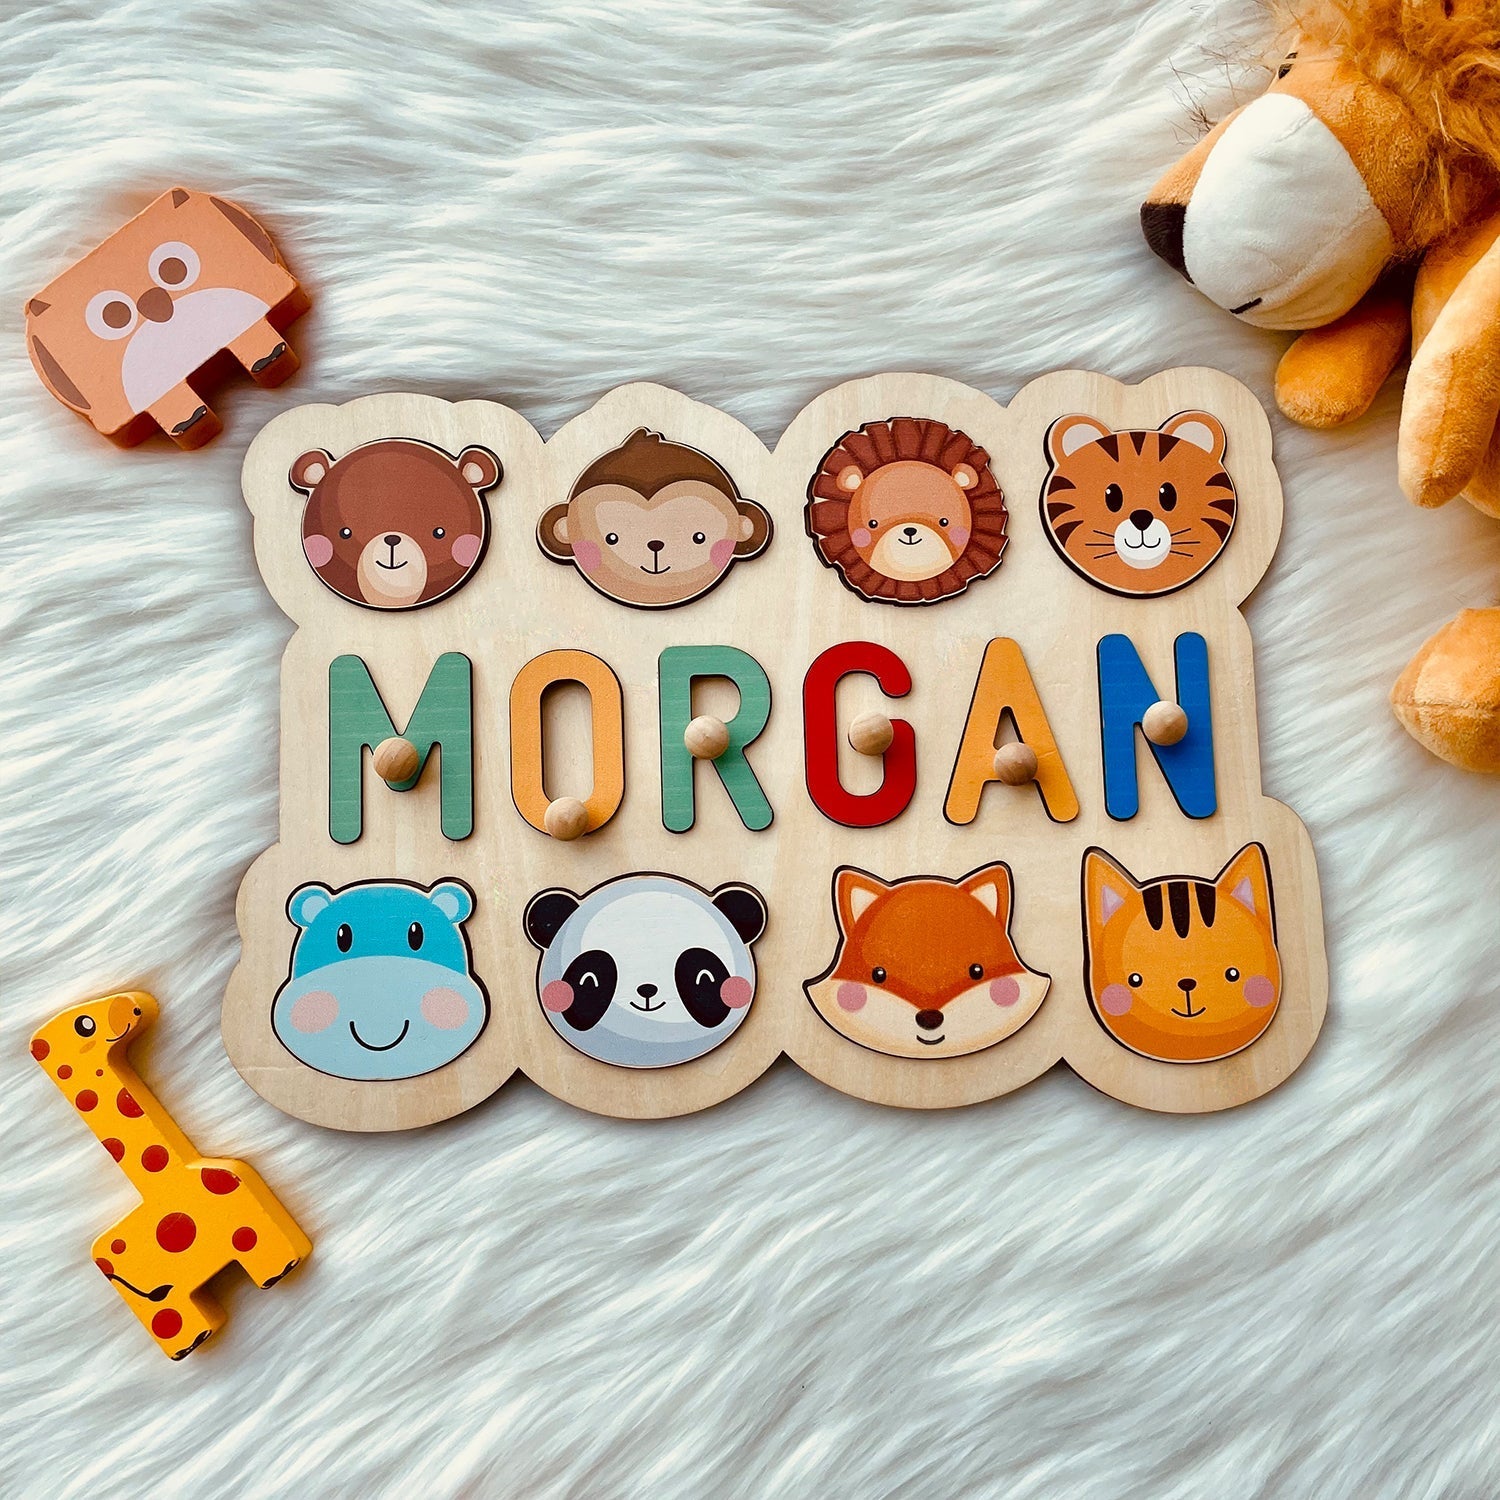 Personalised Wooden Baby Name Puzzle - Outlines Product Name: Personalized Wooden Name Puzzle For Baby Gift Material: Eco-Friendly Plywood BasswoodLetters Available: Up to 10Engraving Messages: AvailableNon-Toxic: YesNon-Harmful: Yes Color: Pastel-boy; Pa